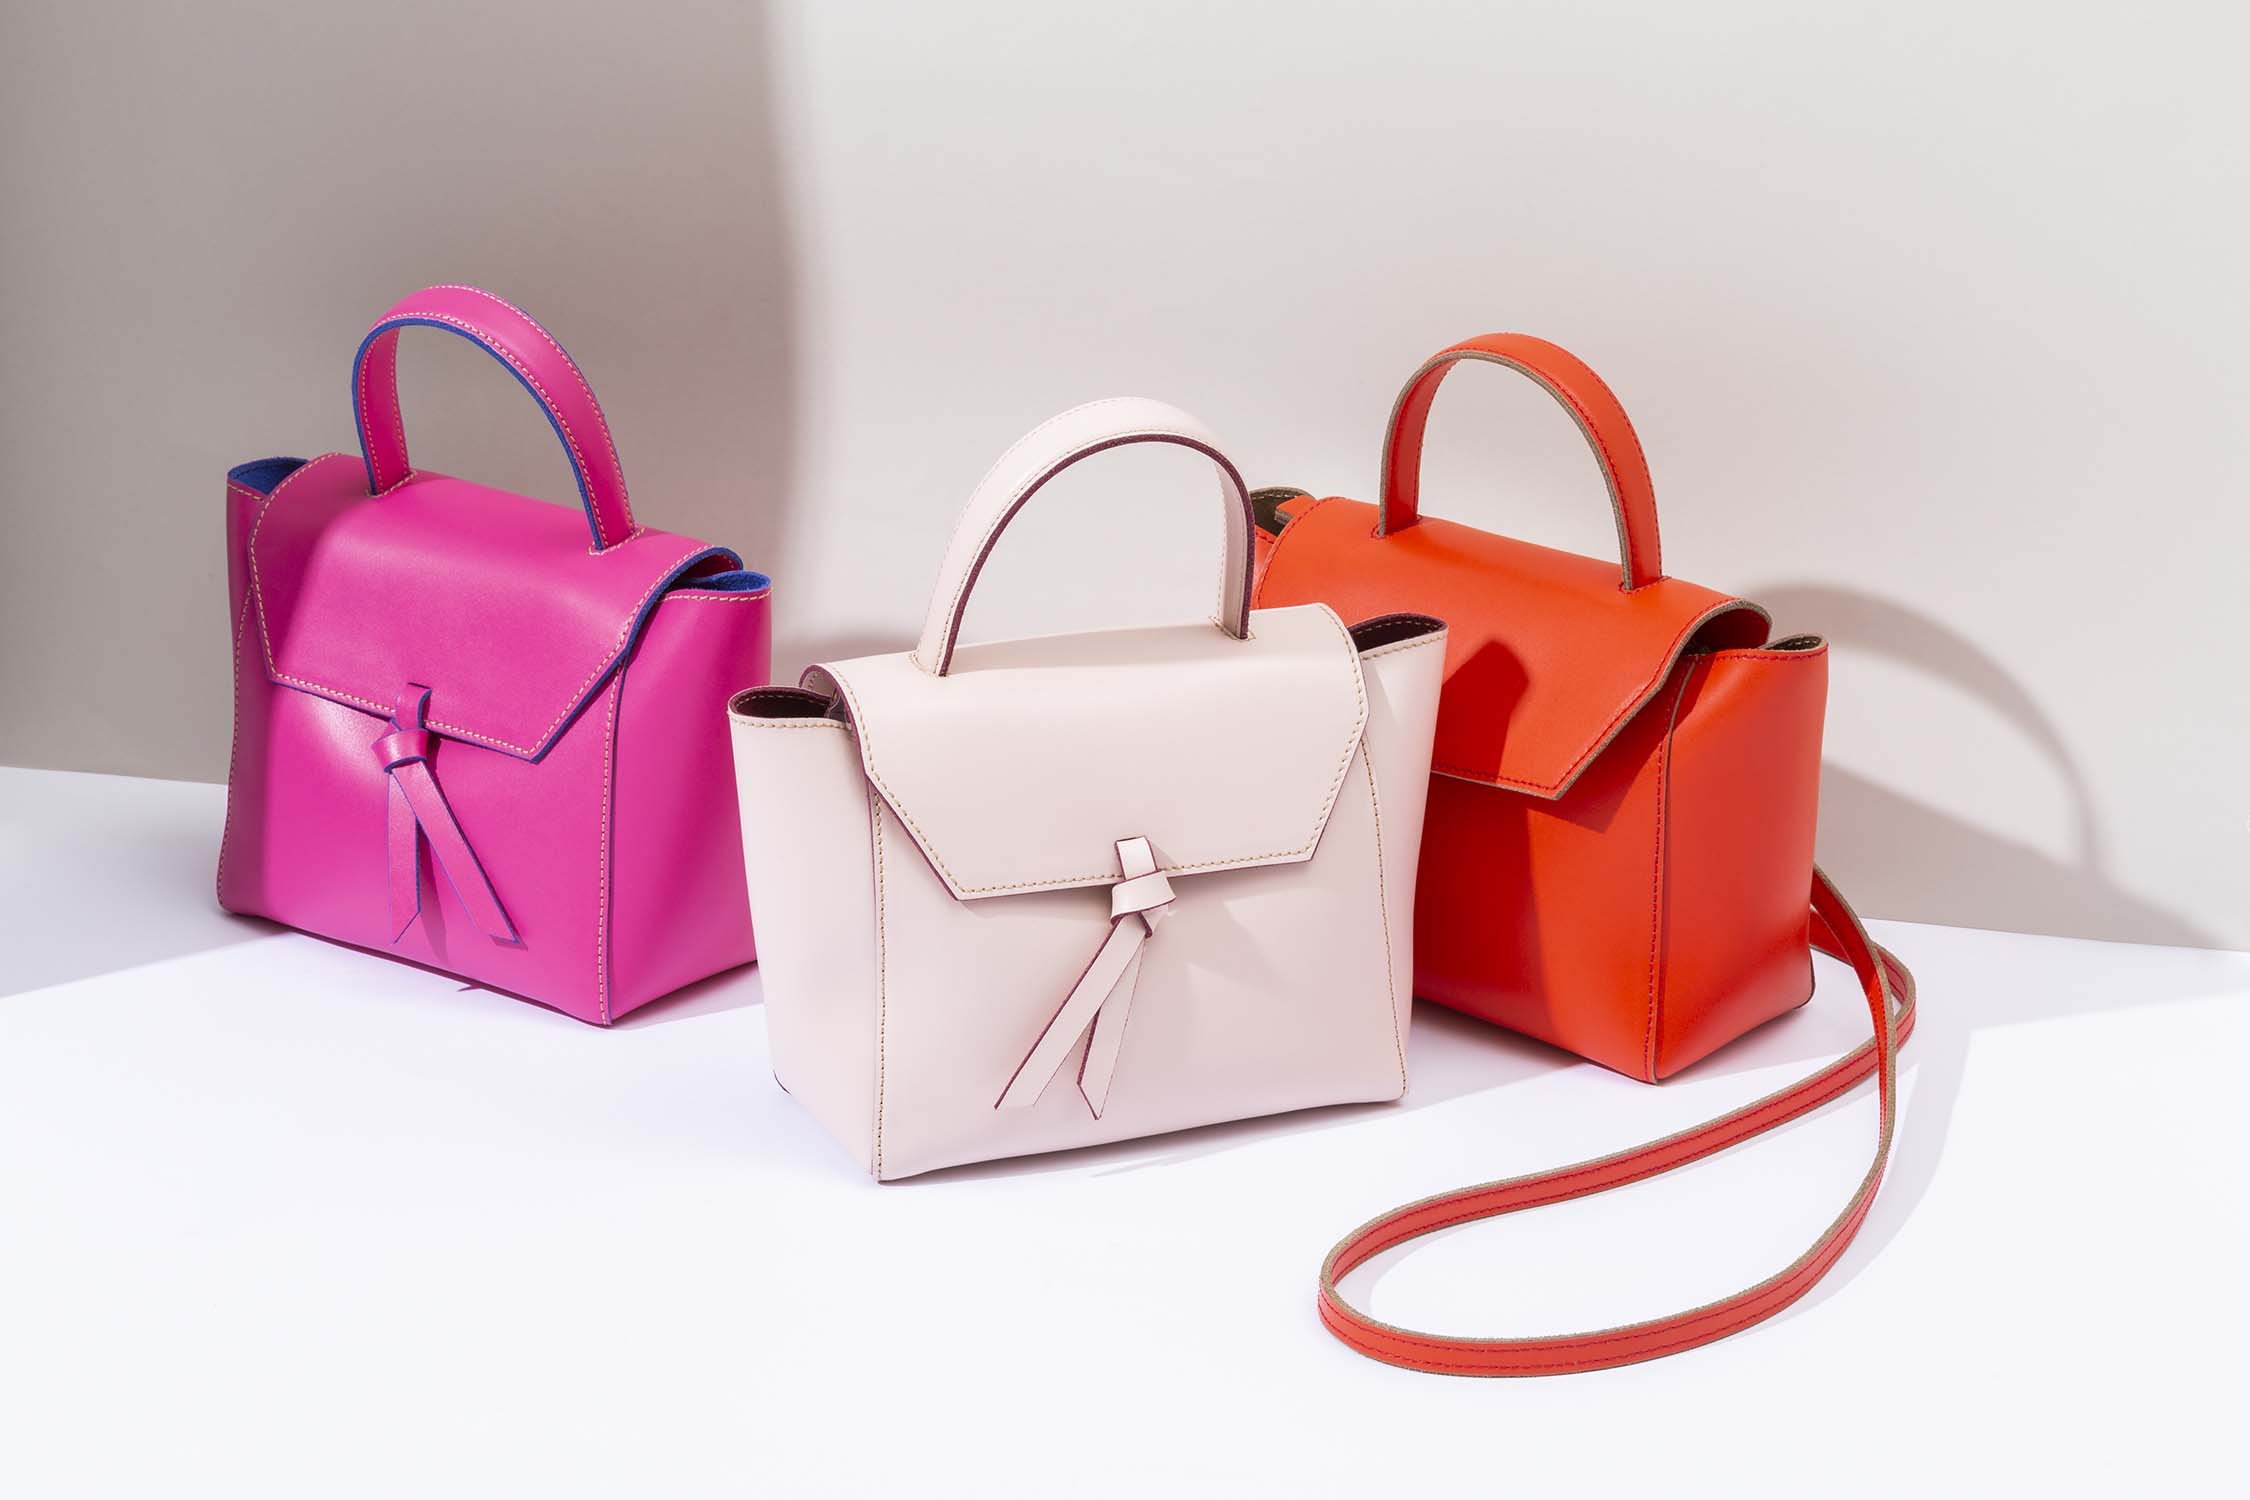 New Arrivals | Luxury Women's Italian Made Leather Handbags, Purses and ...